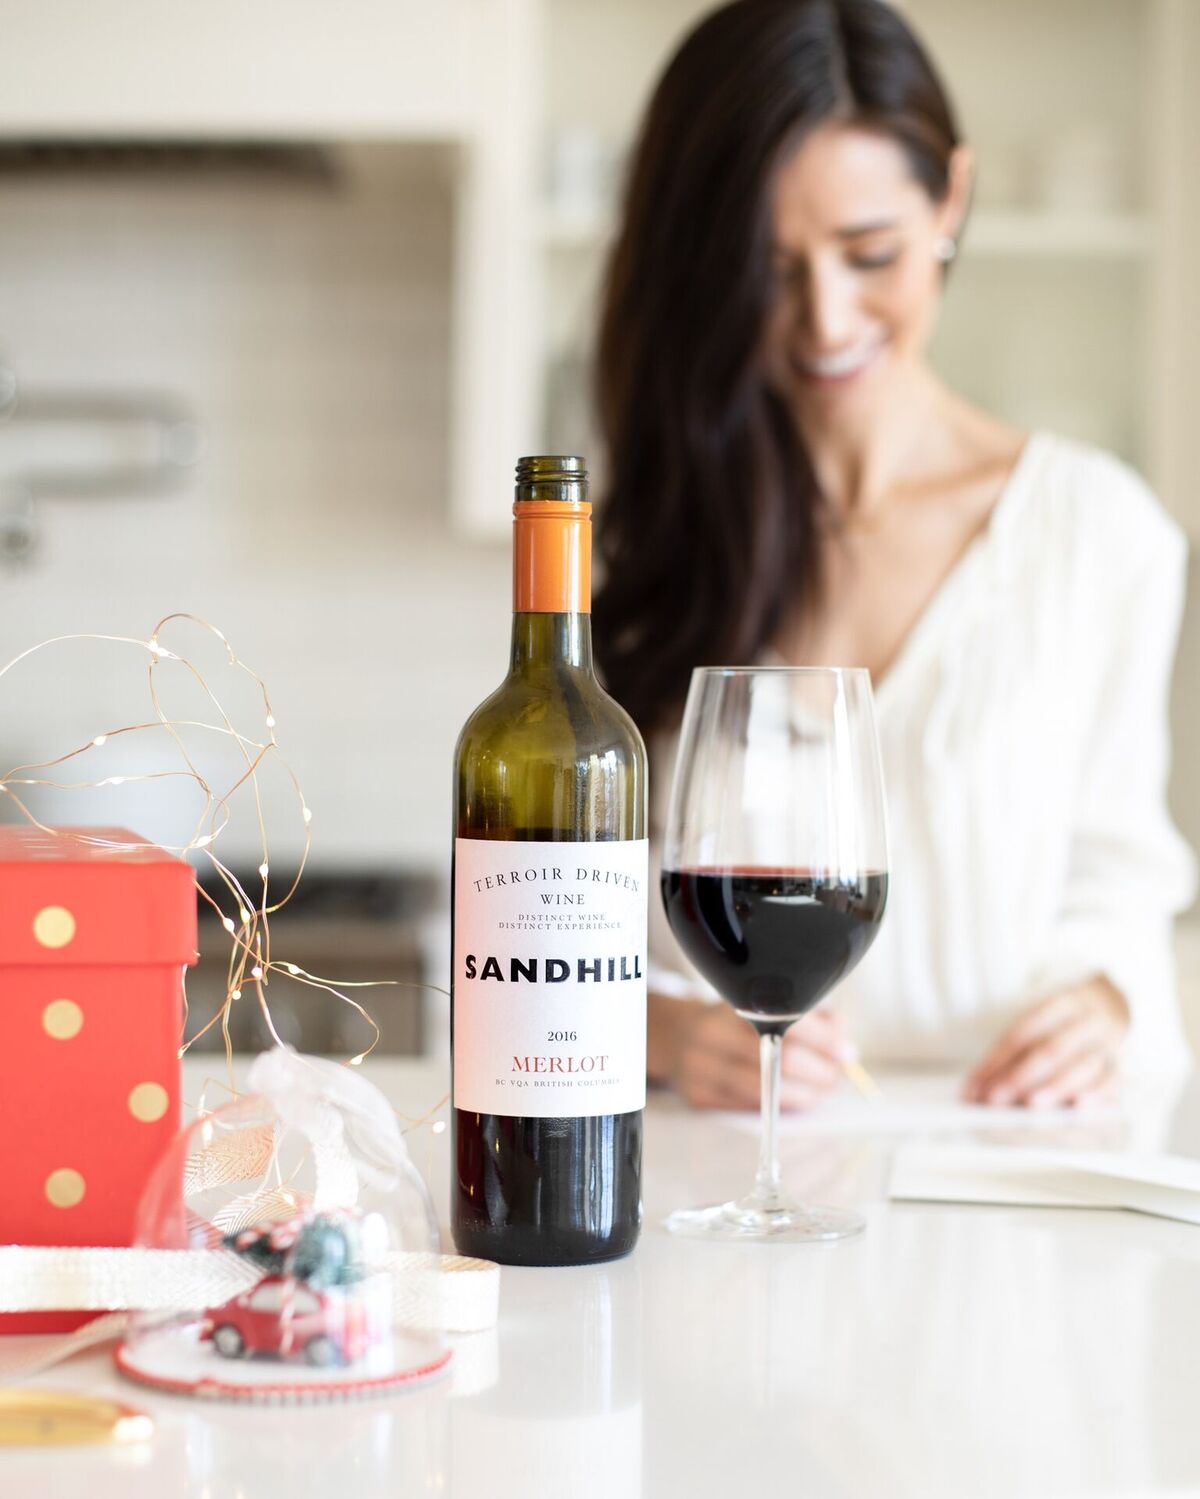 12 Days of Christmas Giveaway for 1 full year of Sandhill wine delivered to your door!